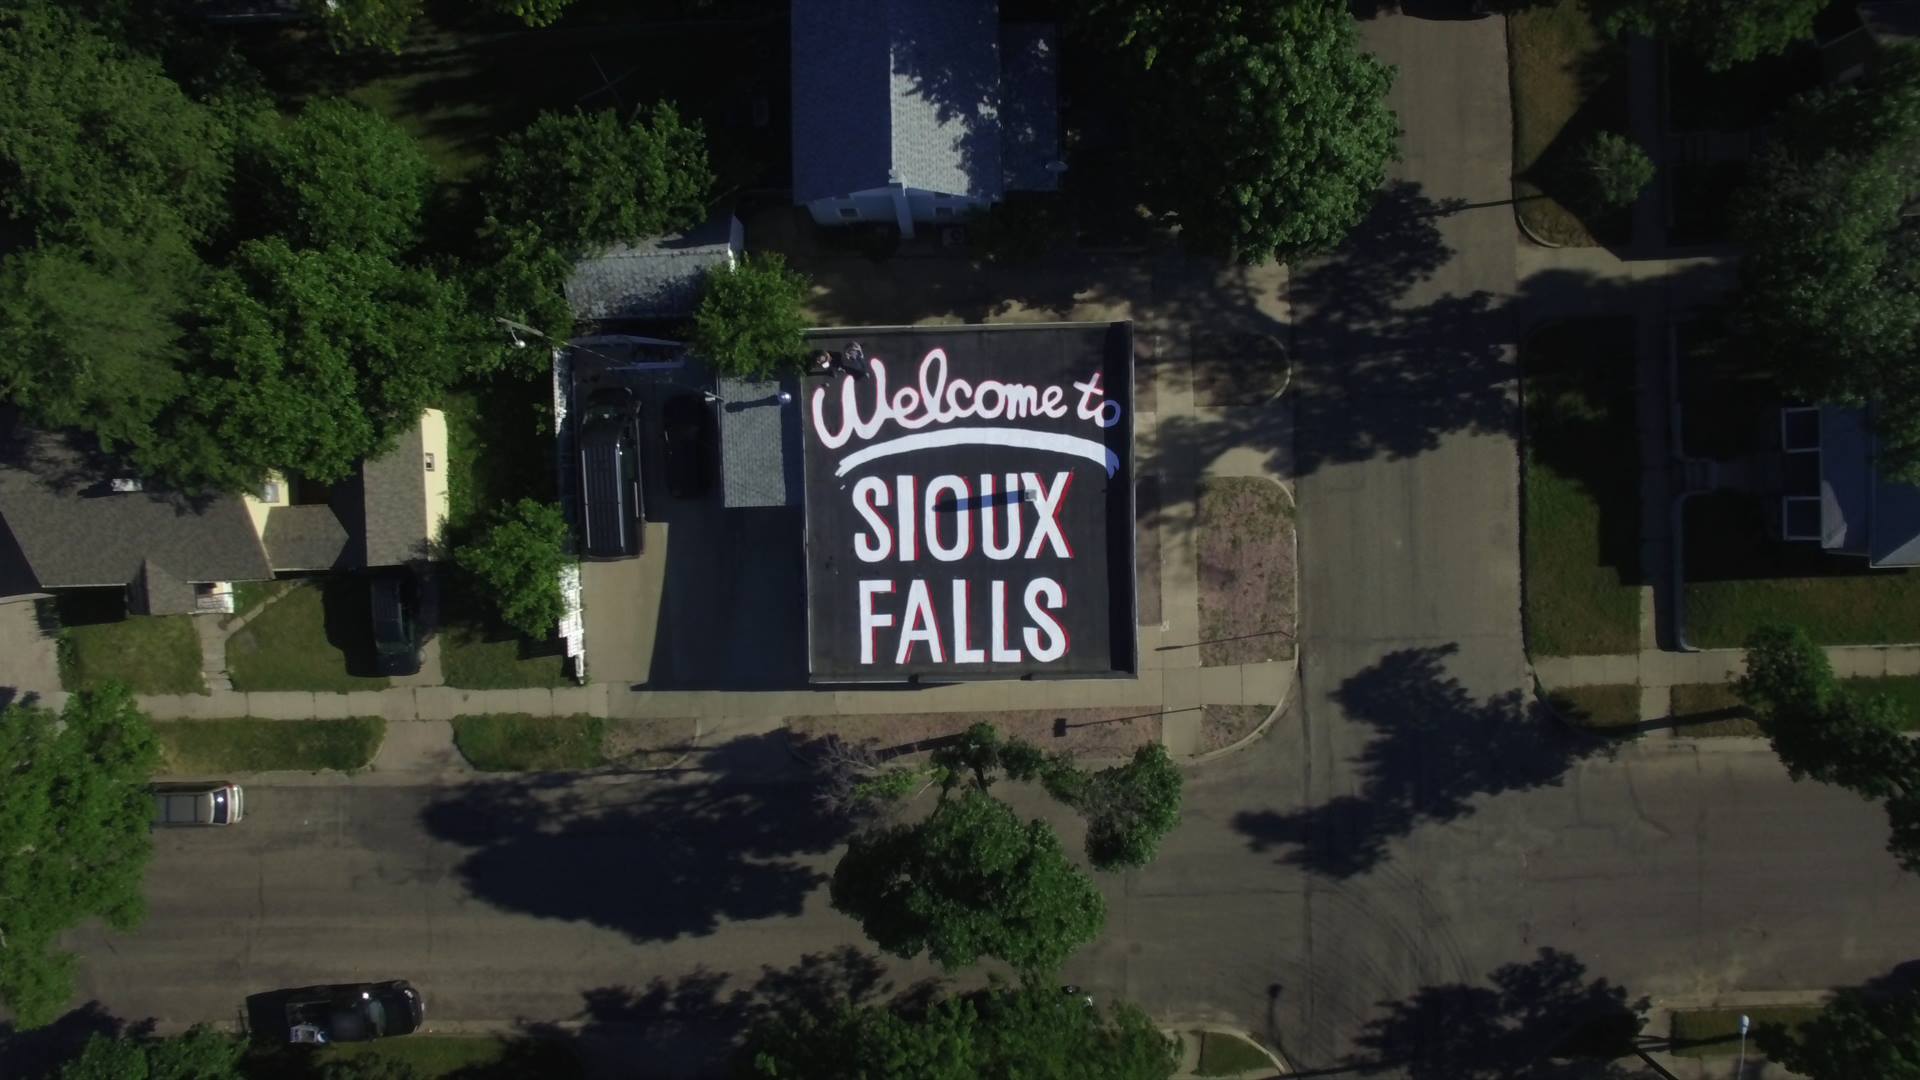 Welcome to Sioux Falls